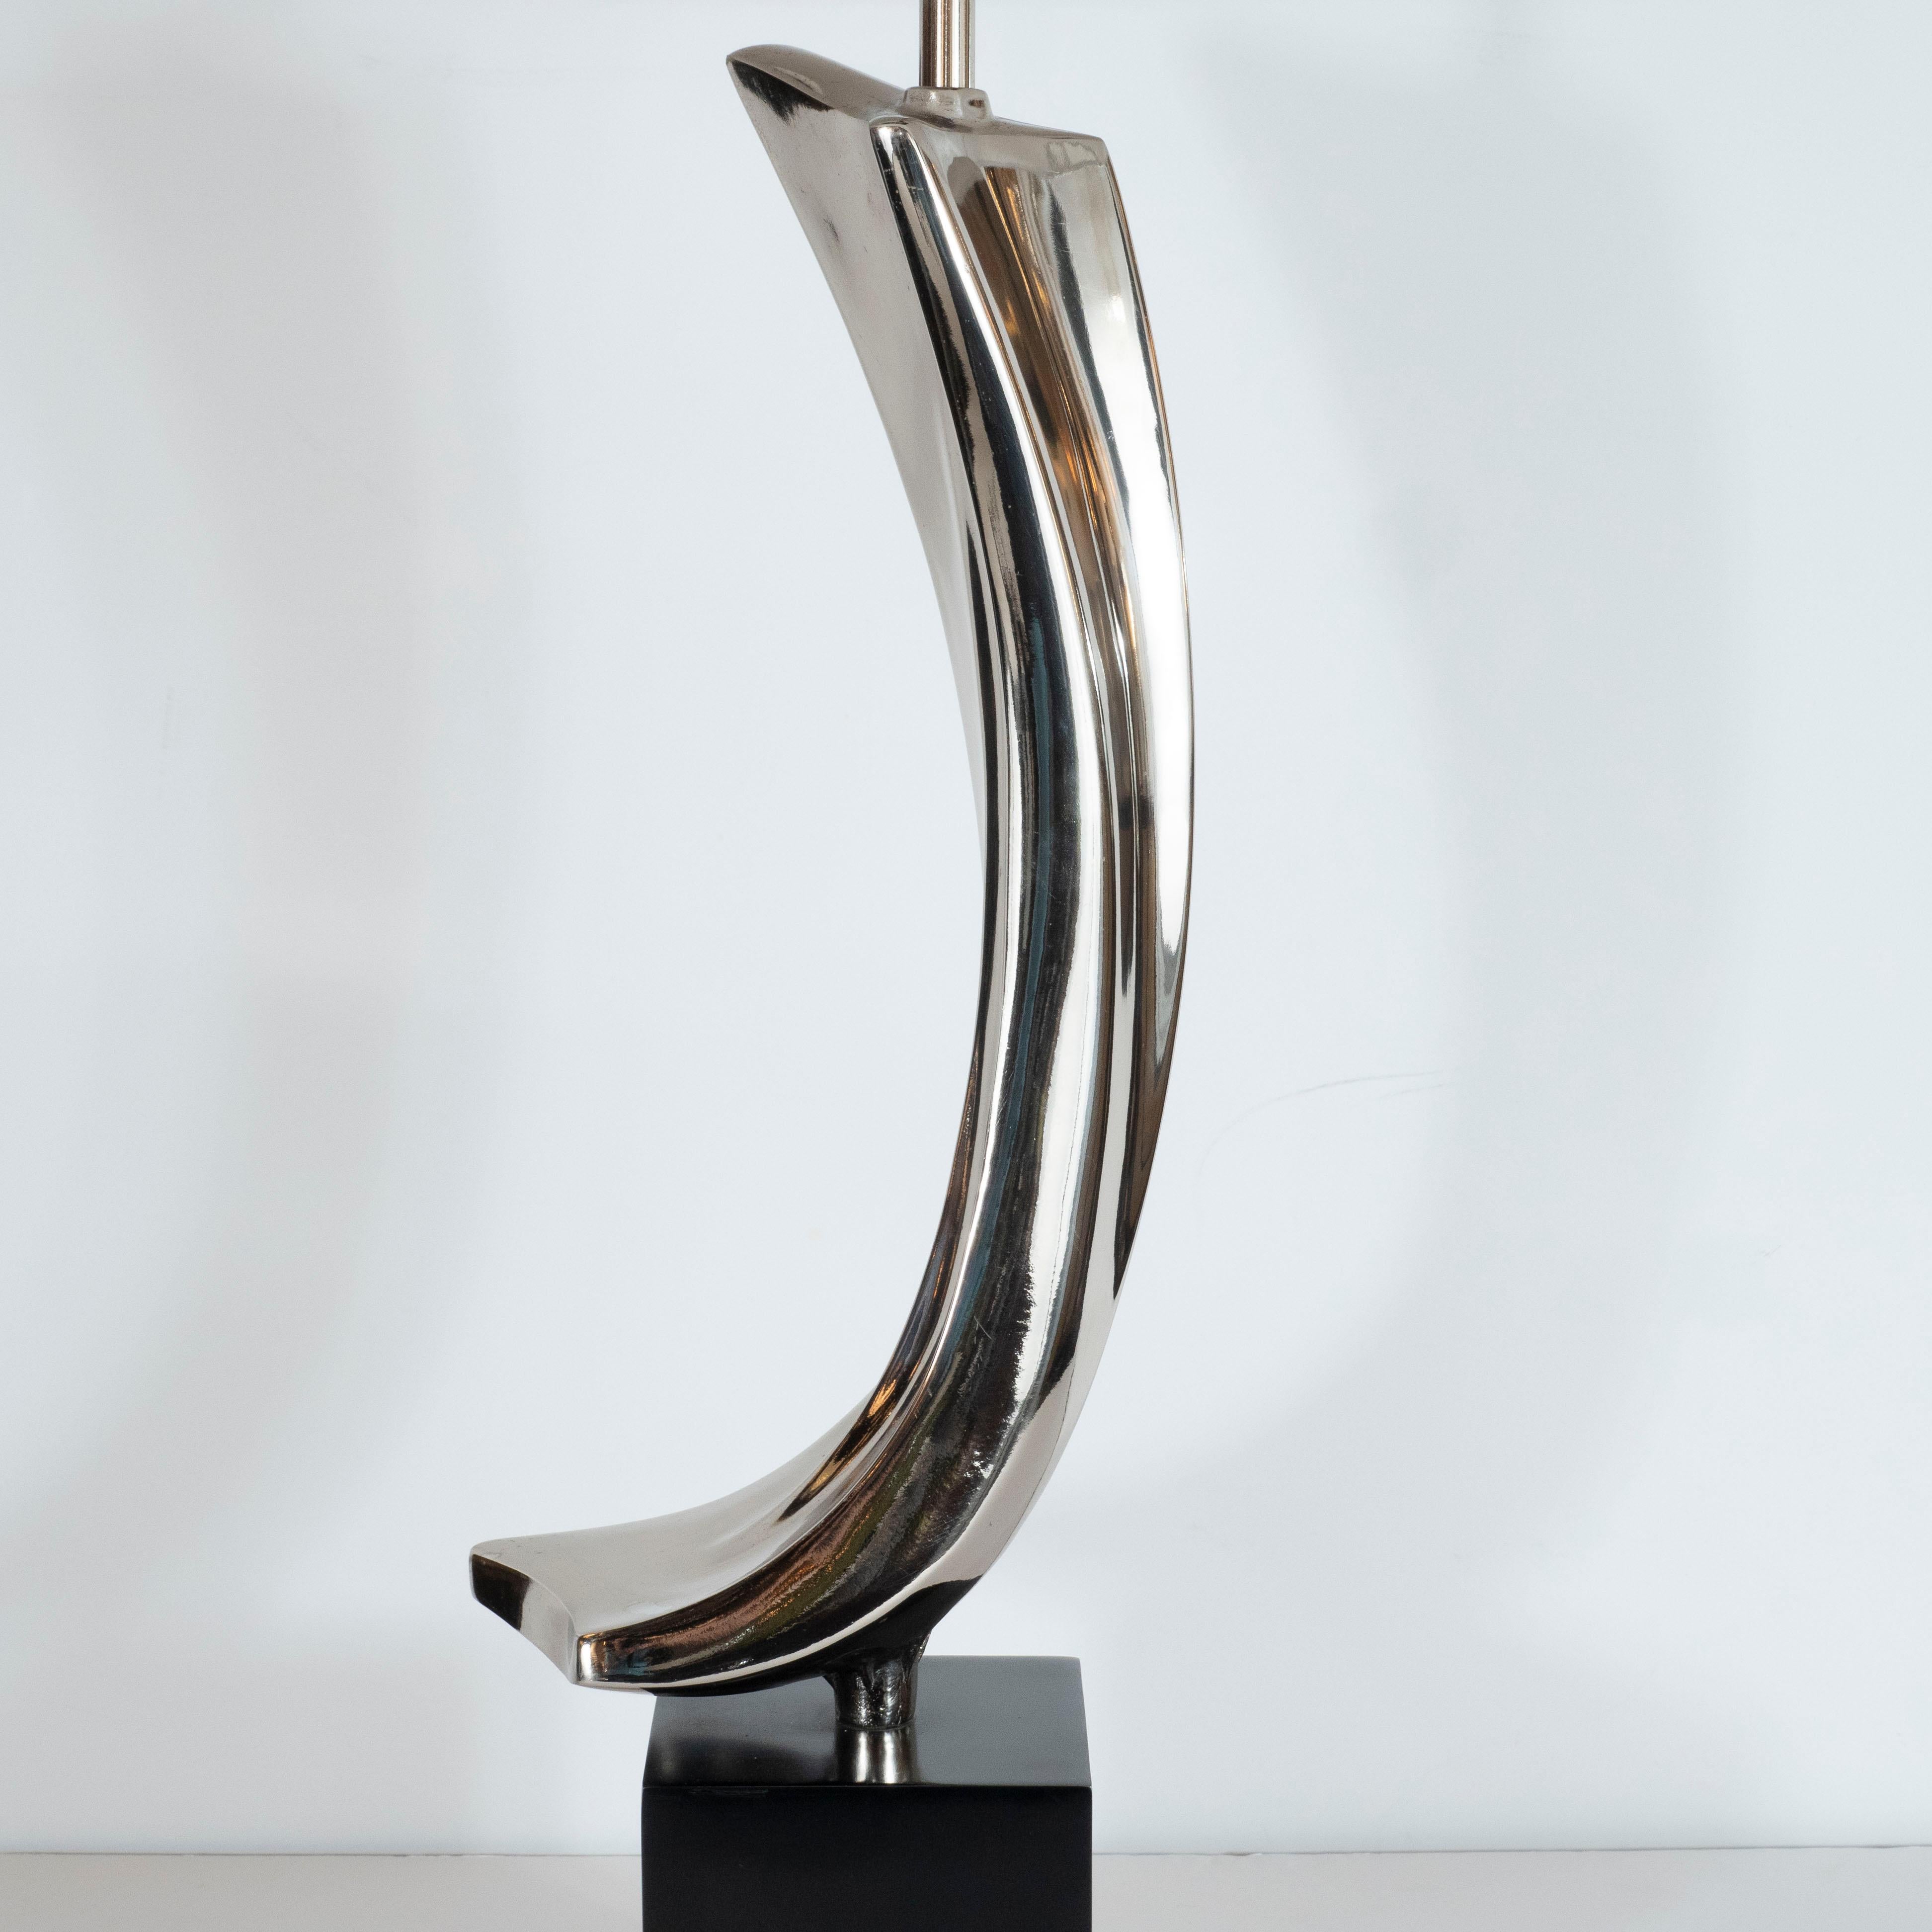 This sculptural and dynamic Mid-Century Modern lamp was designed by Harold Weiss and Richard Barr manufactured by the Laurel Lamp Company in the United States, circa 1960. Forged in lustrous chrome- offering the appearance of quick silver- it